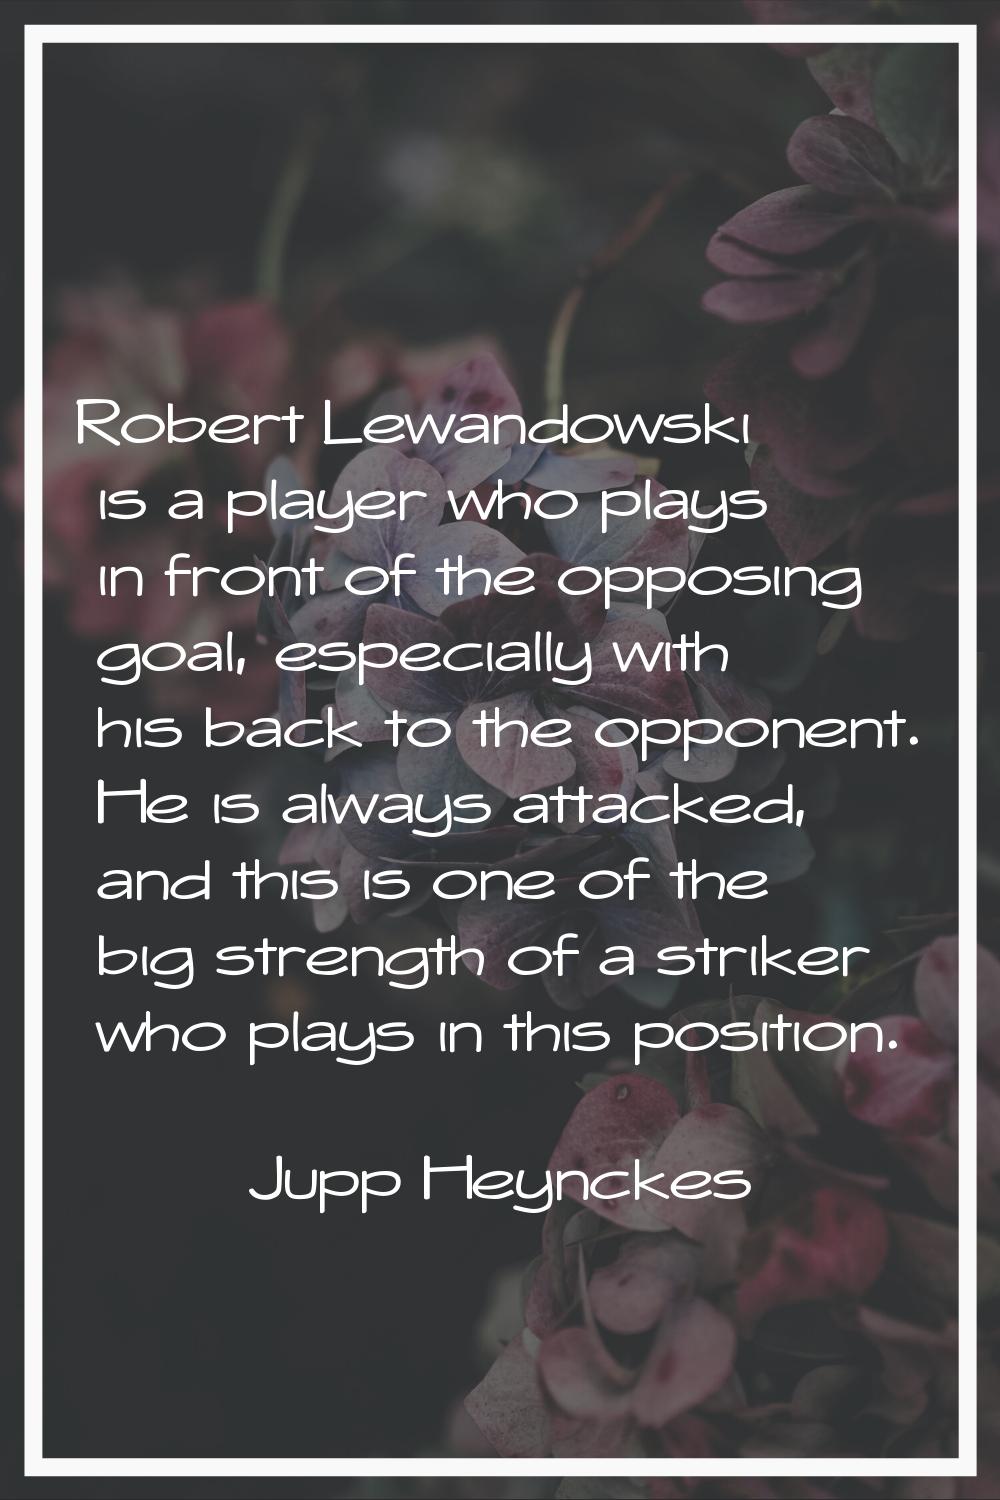 Robert Lewandowski is a player who plays in front of the opposing goal, especially with his back to